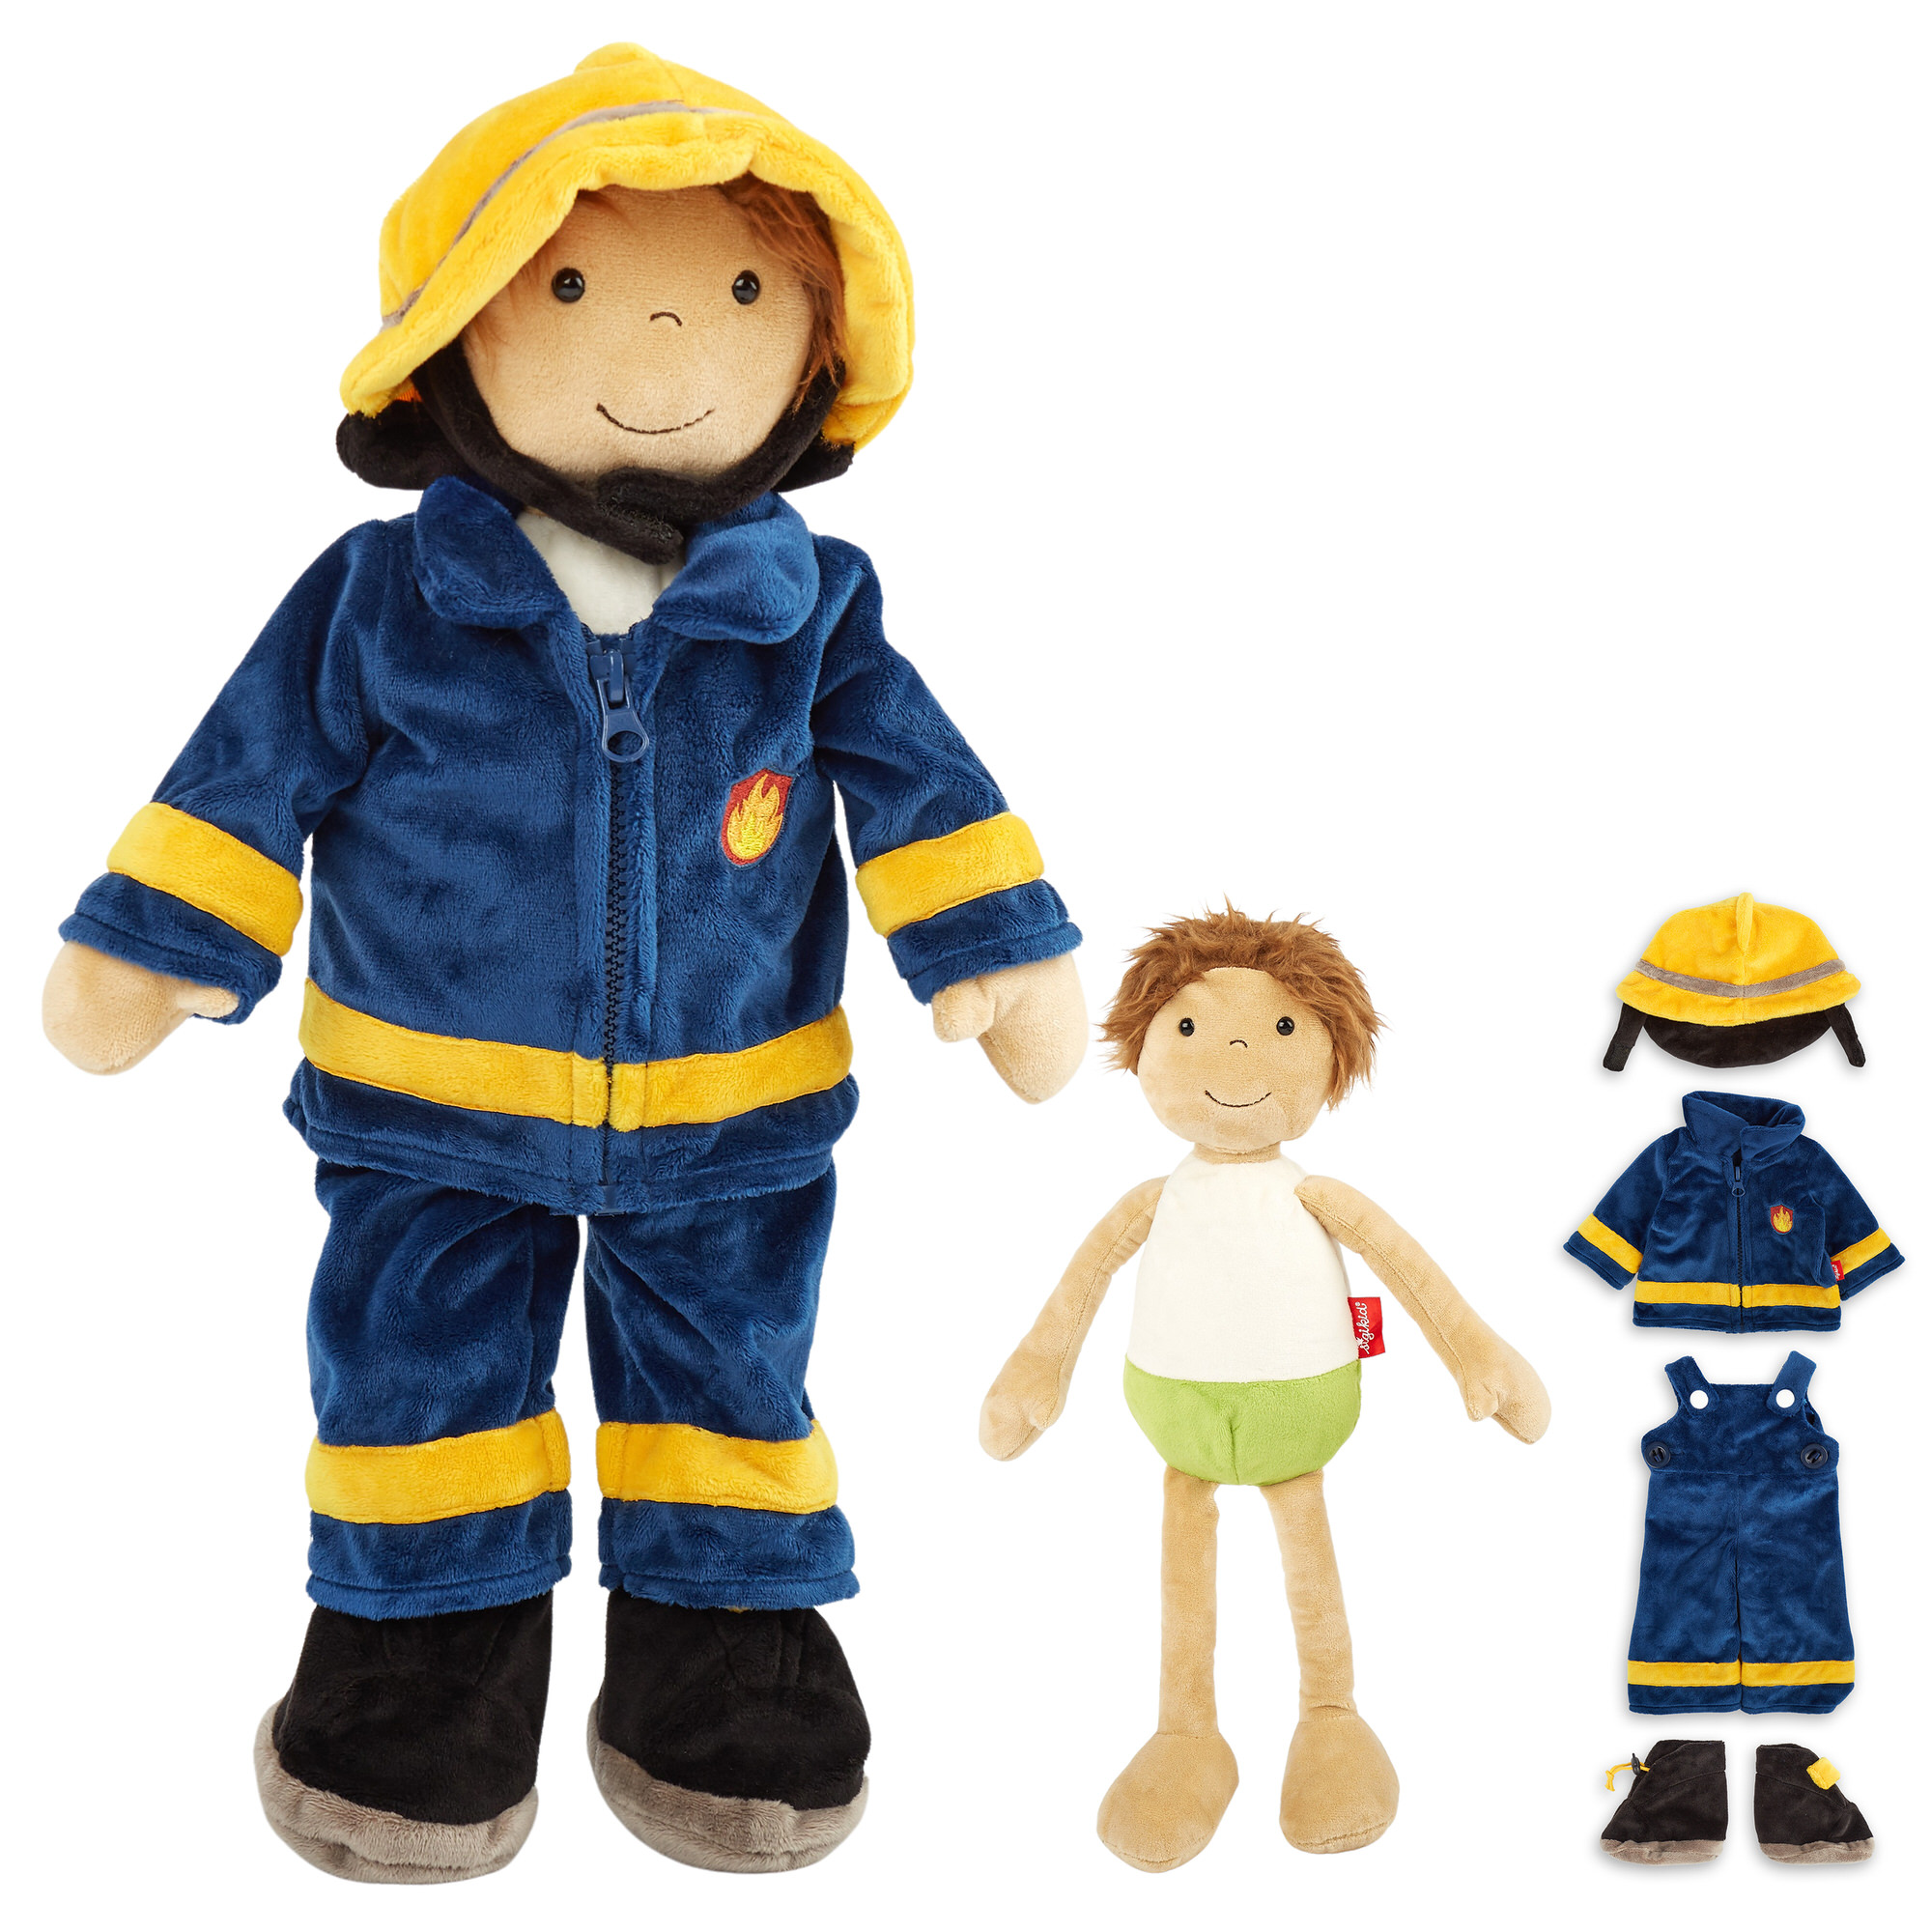 Educational soft doll firefighter, learn-how-to-dress